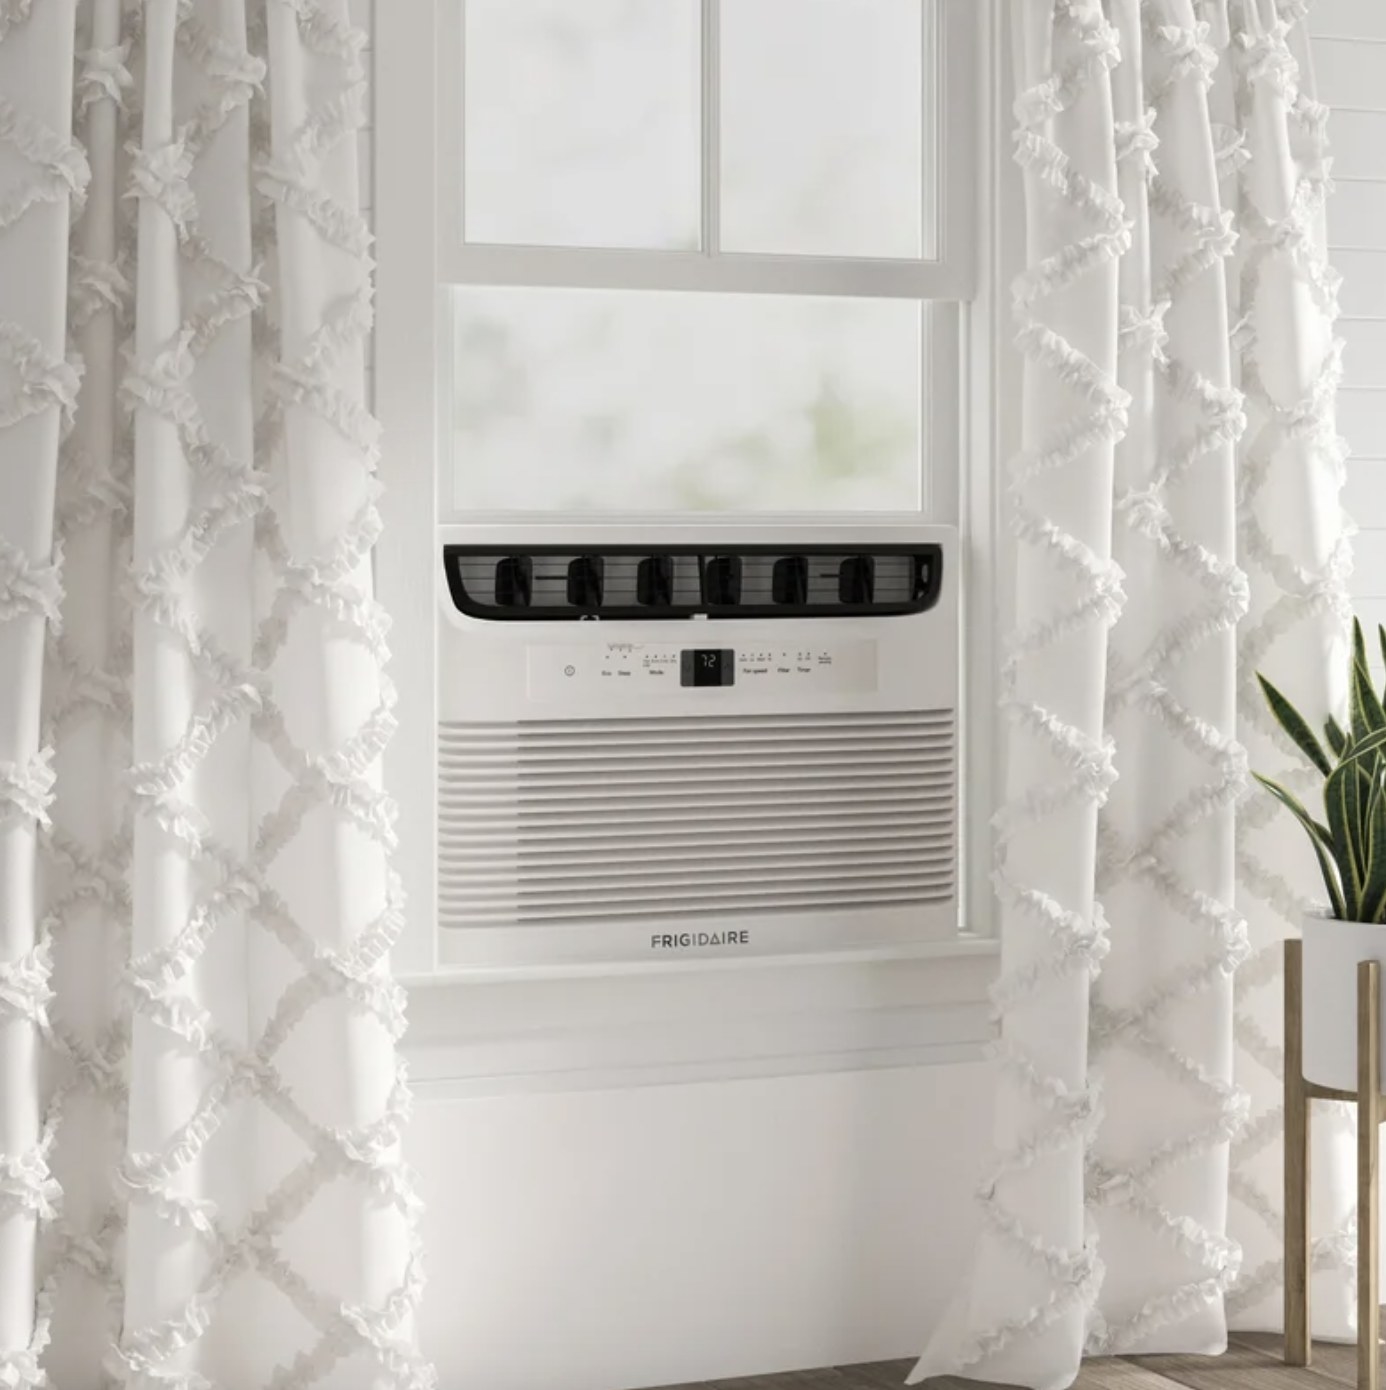 The white AC unit says &quot;FRIGIDAIRE&quot; and is in a window between two white curtains